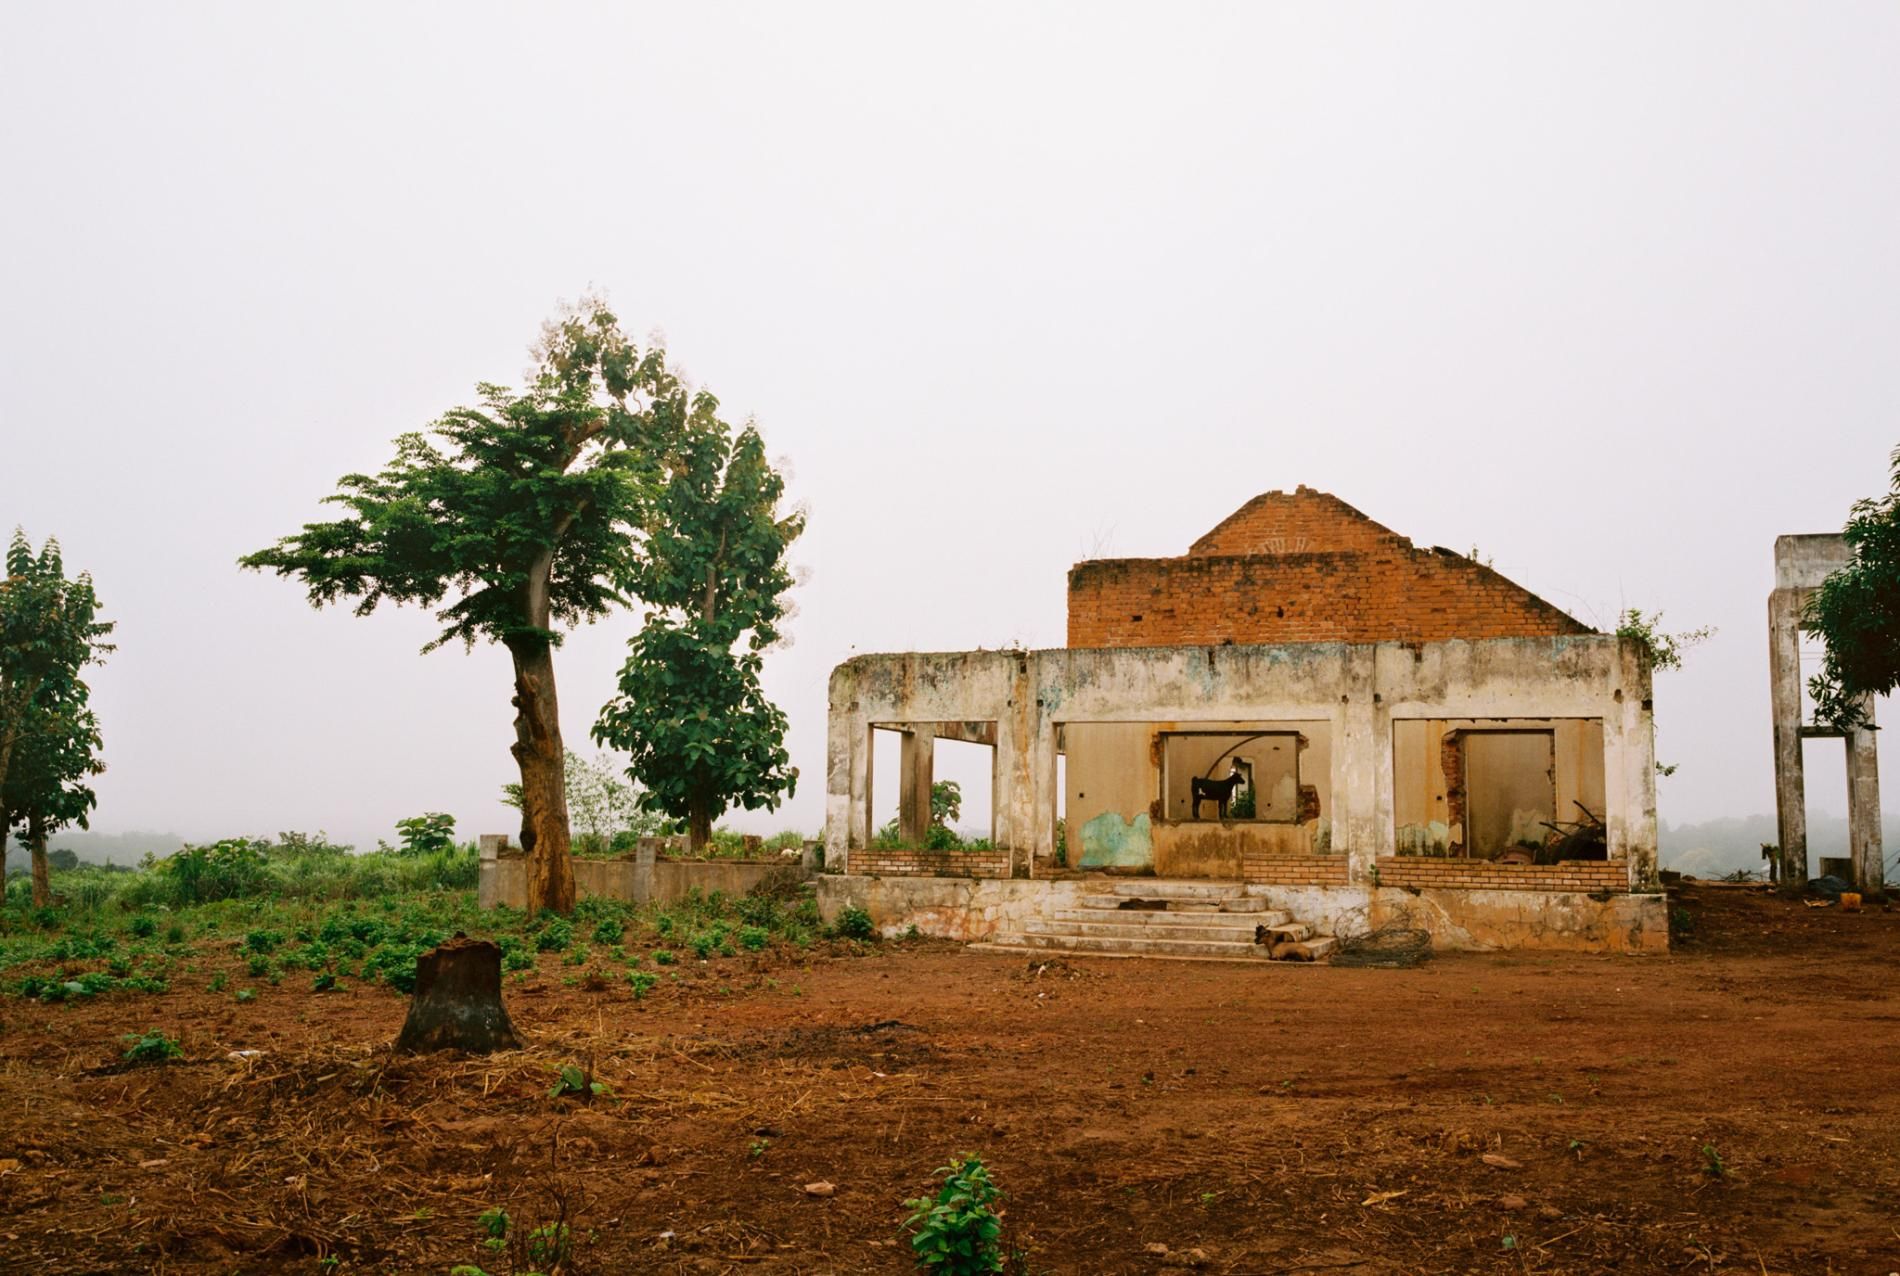 The destruction of many administrative buildings in the towns occupied by the Seleka—including the prefect’s residence in Bambari (left)—has hindered the rebuilding of shattered communities. But the biggest challenge in many places is coaxing frightened residents to return. The mayor of Bangui’s PK12 district, Jean Emmanuel Gazanguenza (right), has encouraged Muslims and Christians to return. So far no Muslims have done so. Image by Marcus Bleasdale. Central African Republic.